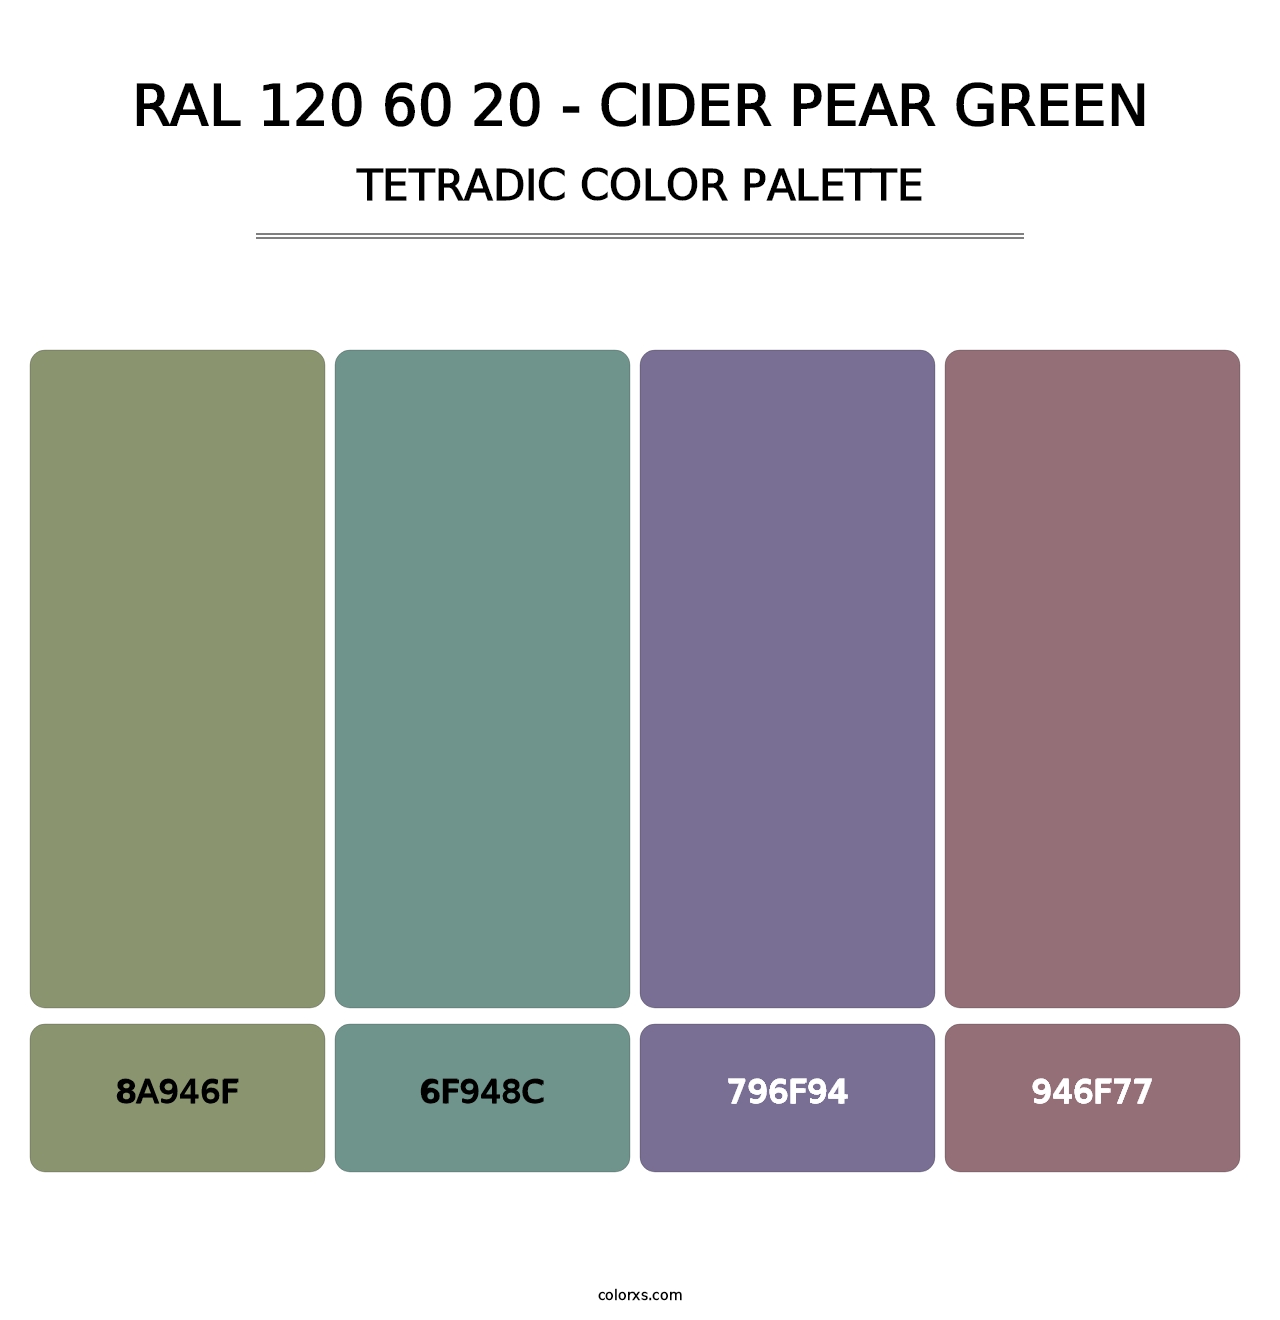 RAL 120 60 20 - Cider Pear Green - Tetradic Color Palette